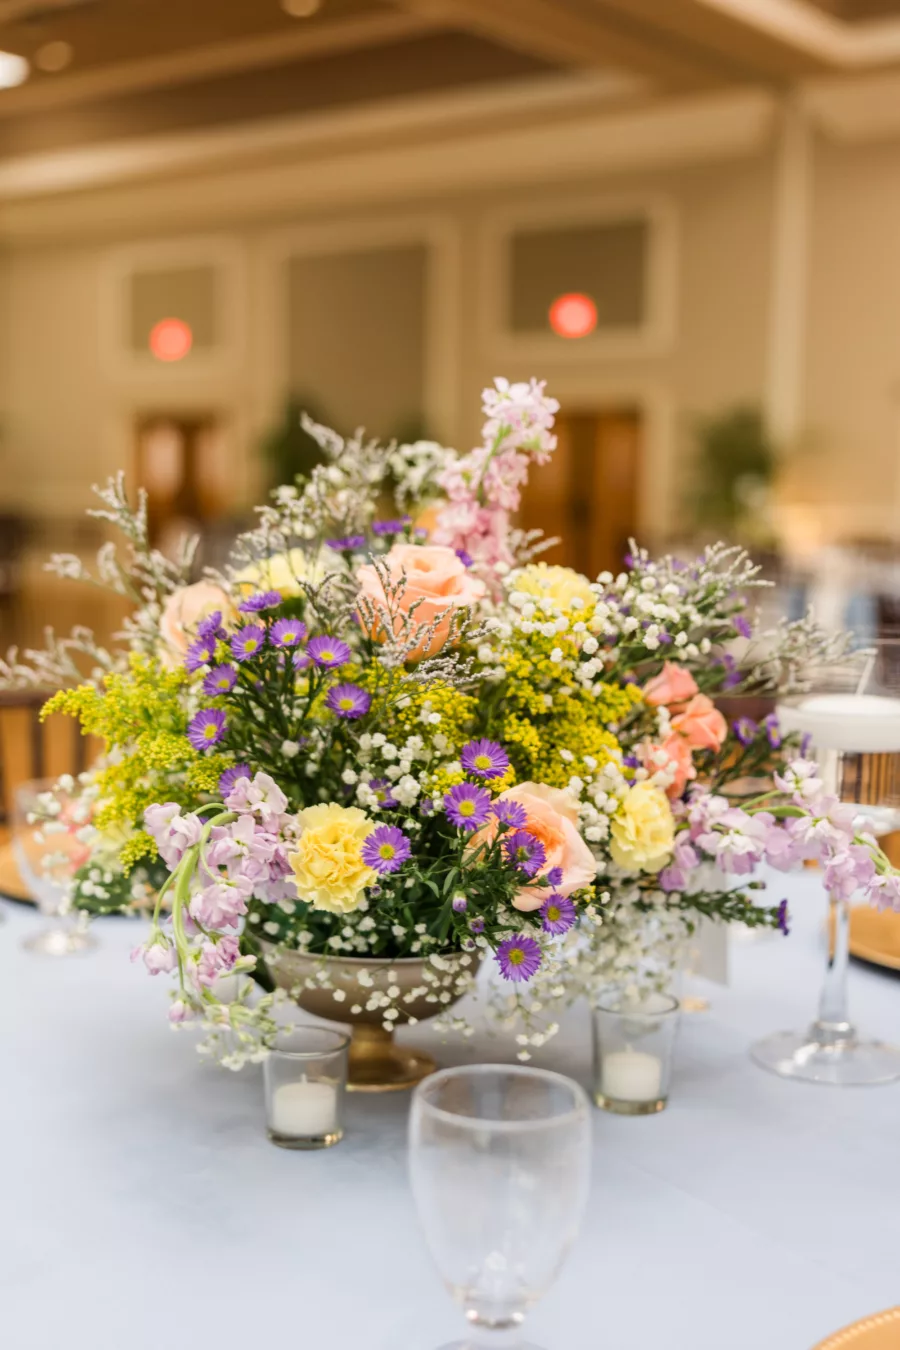 Whimsical Spring Garden Inspired Centerpiece Decor Ideas | Purple Daisies, Baby's Breath, Yellow Carnations, Peach Roses Floral Arrangement Inspiration